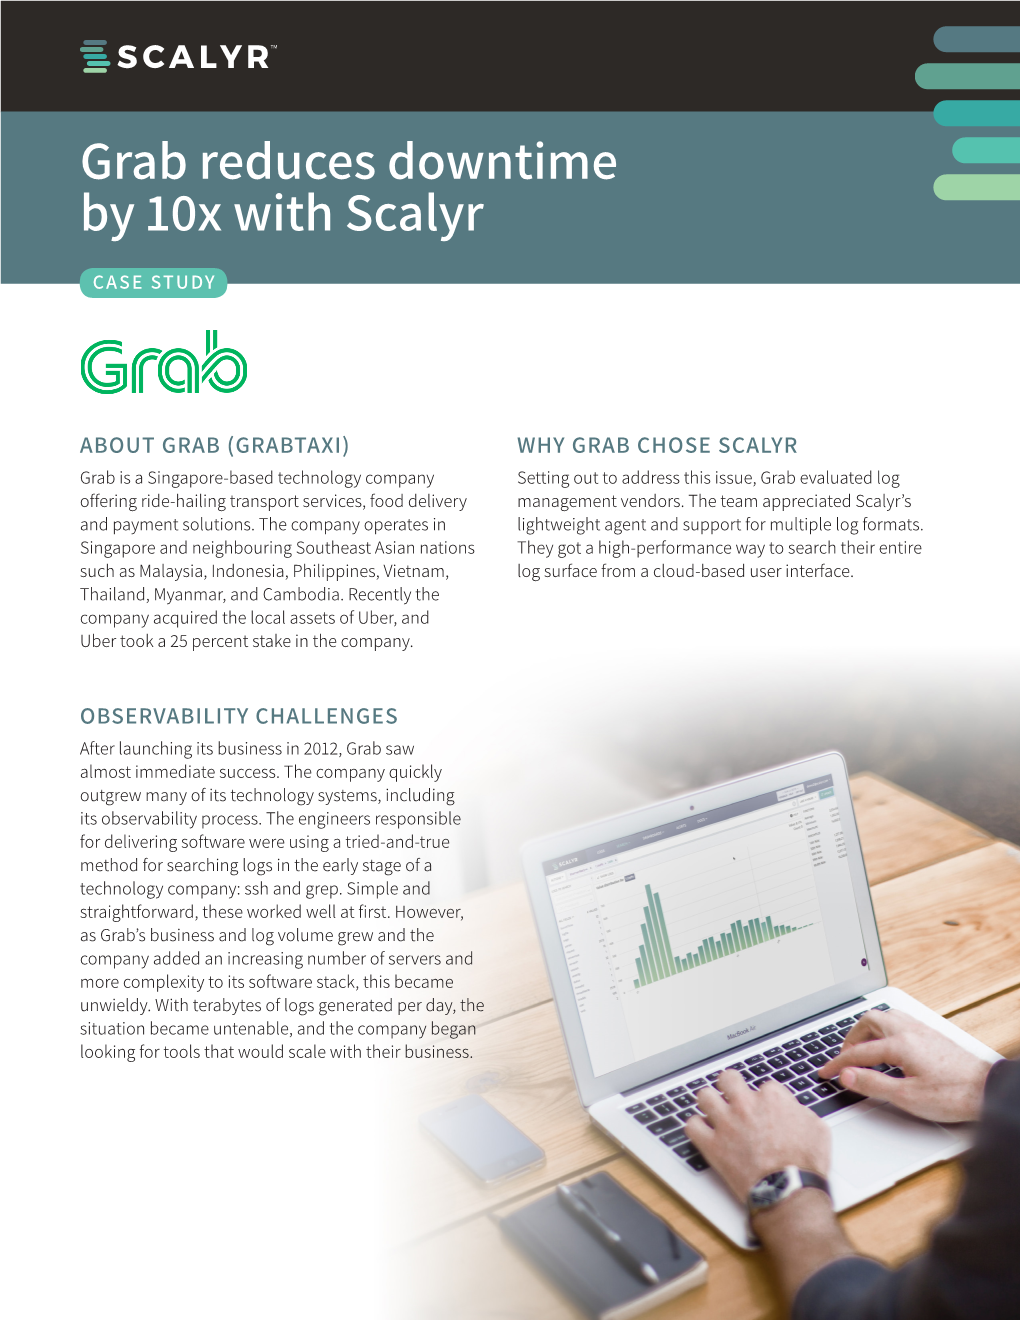 Grab Reduces Downtime by 10X with Scalyr